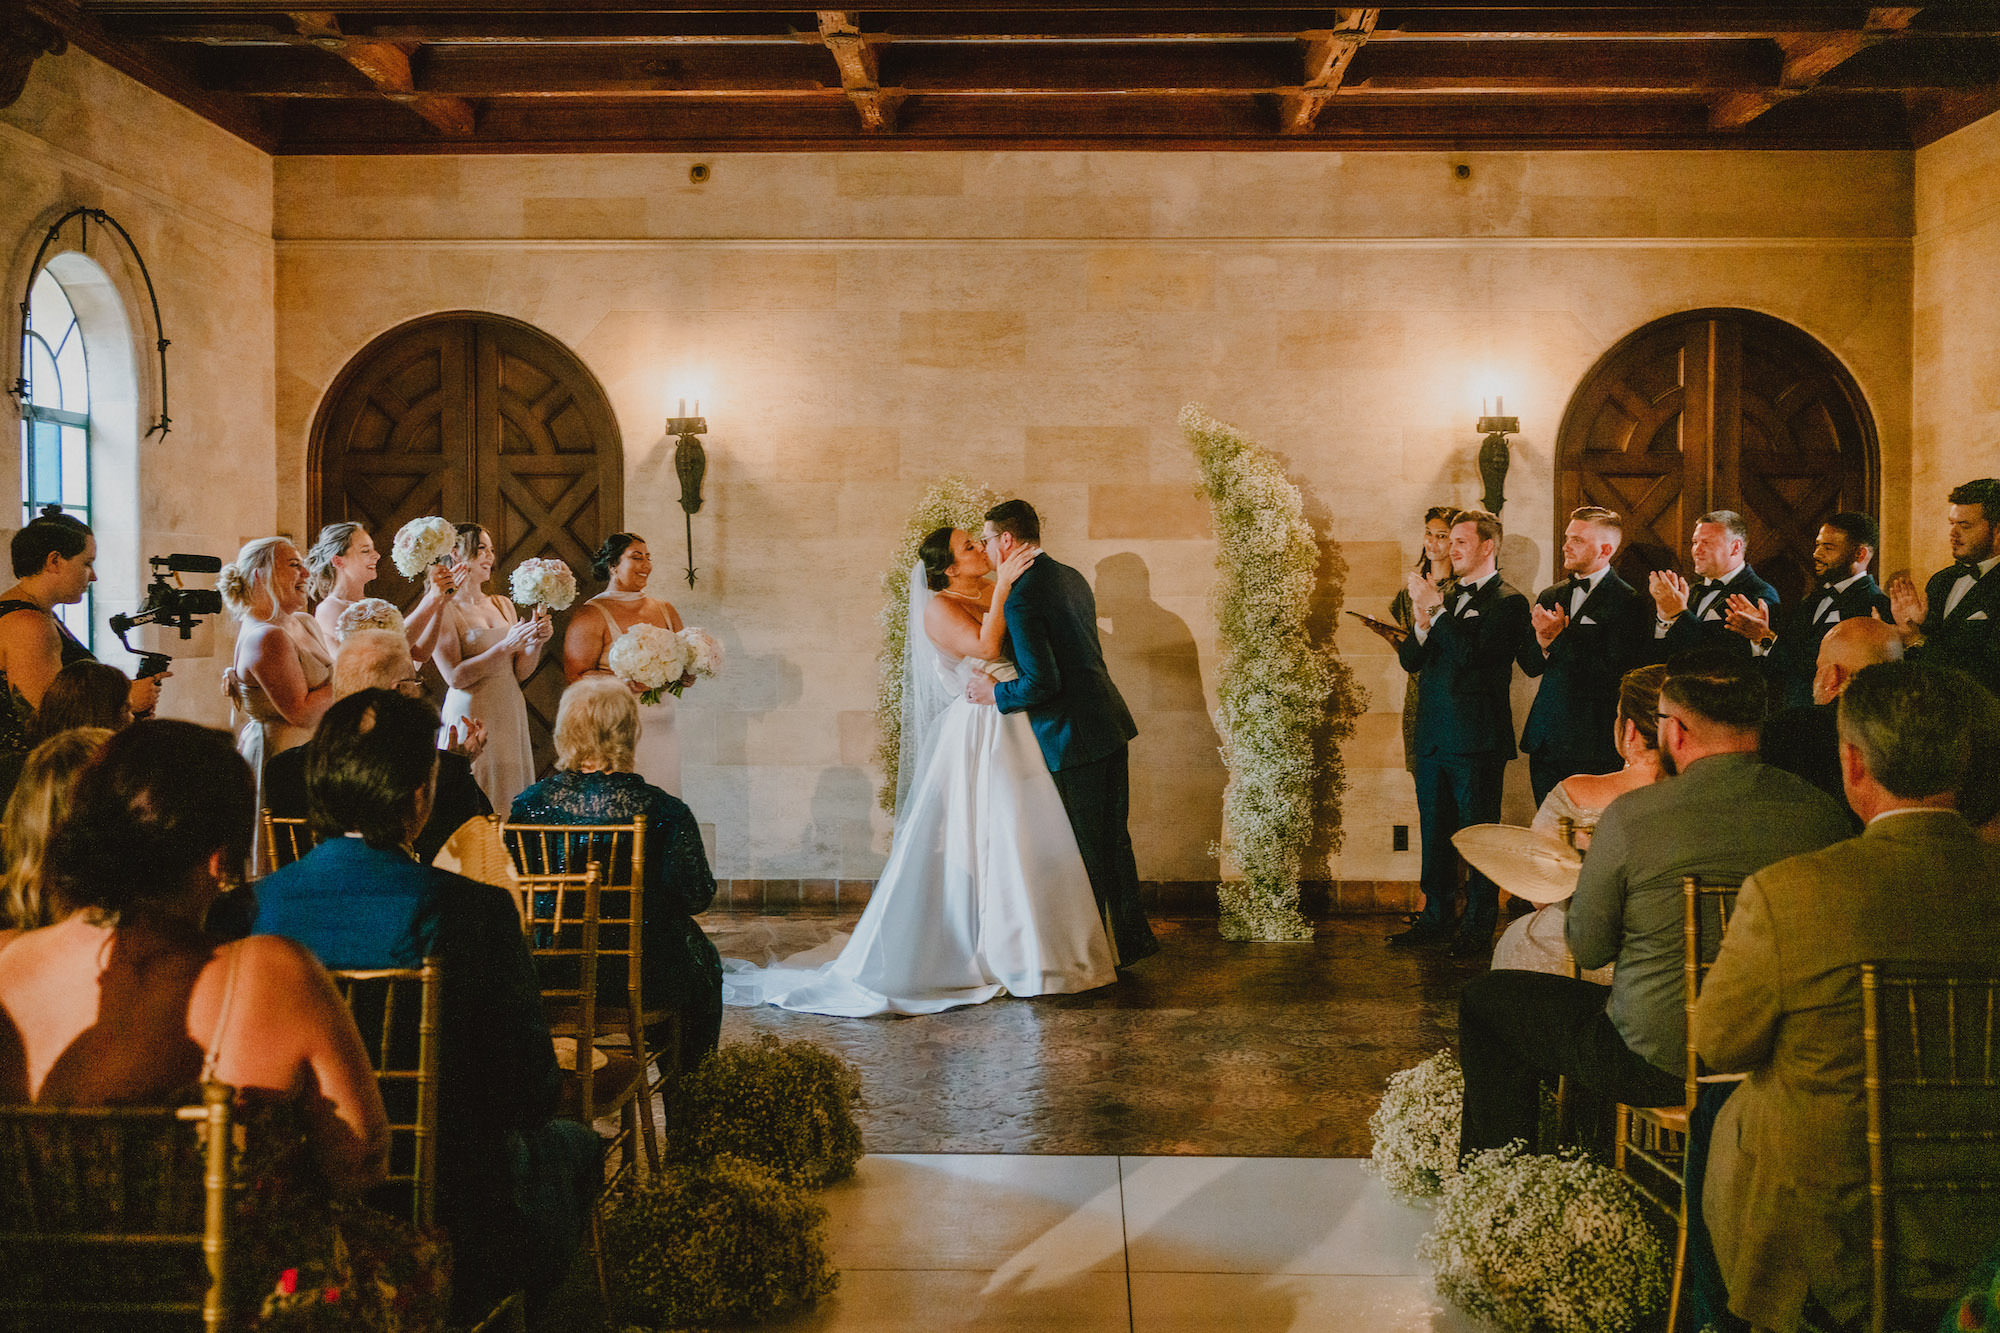 Bride and Groom First Kiss Wedding Portrait | Sarasota Wedding Planner Kelly Kennedy Events | Venue Powel Crosley Estate | Photographer and Videographer Mars and the Moon Films